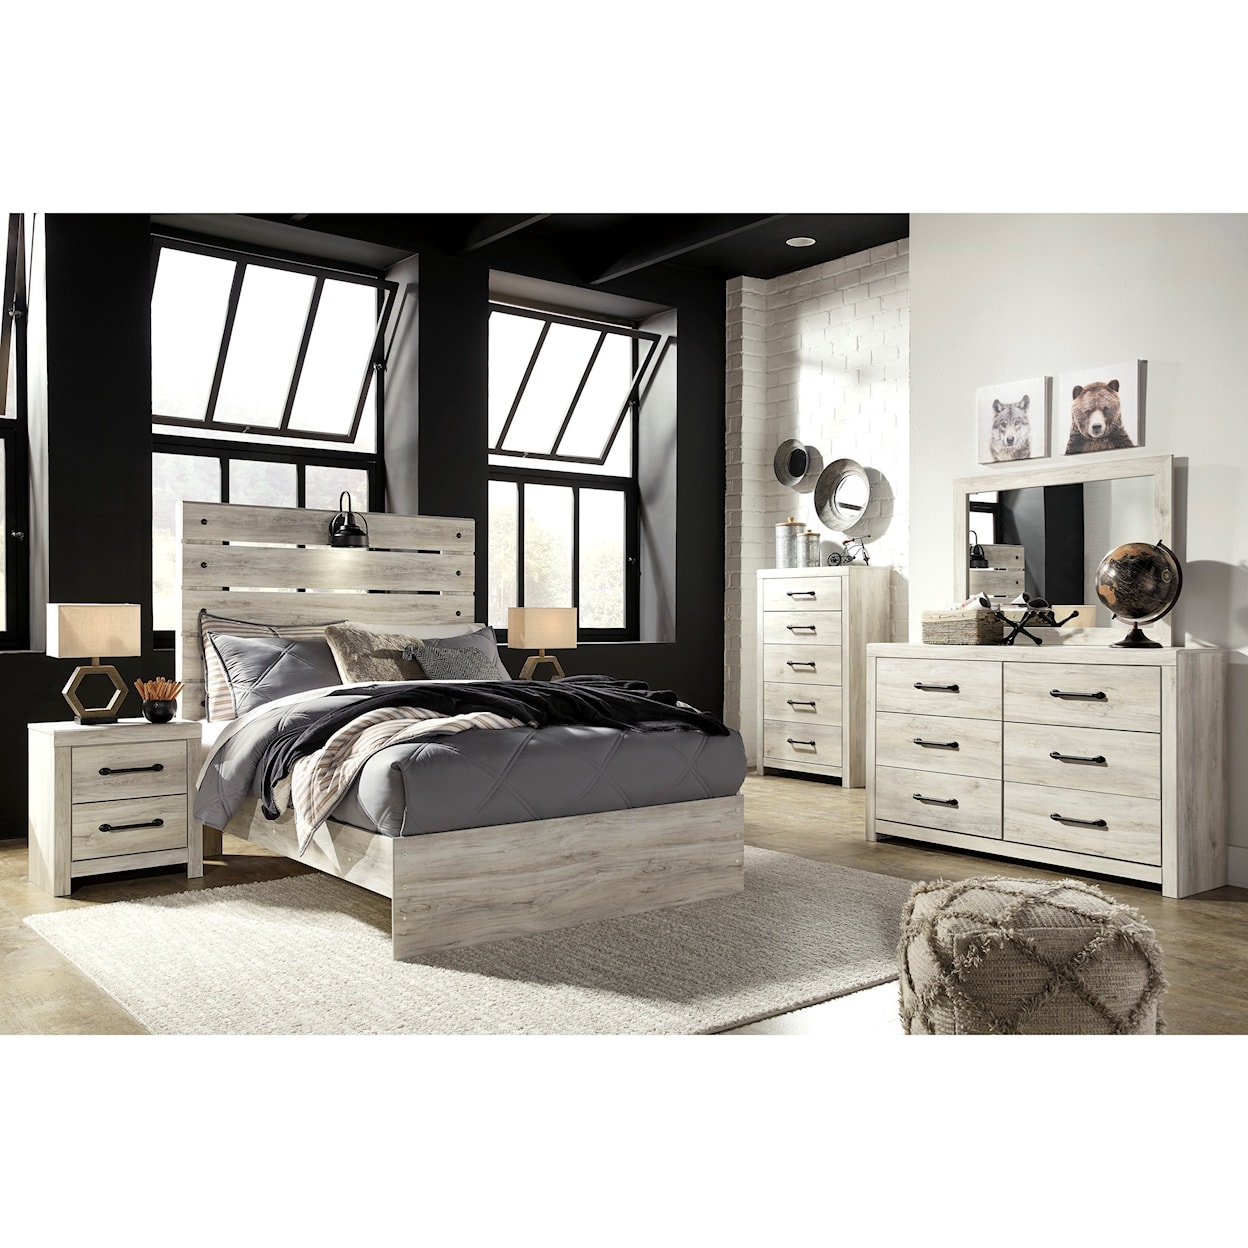 Ashley Furniture Signature Design Cambeck Full Bedroom Group